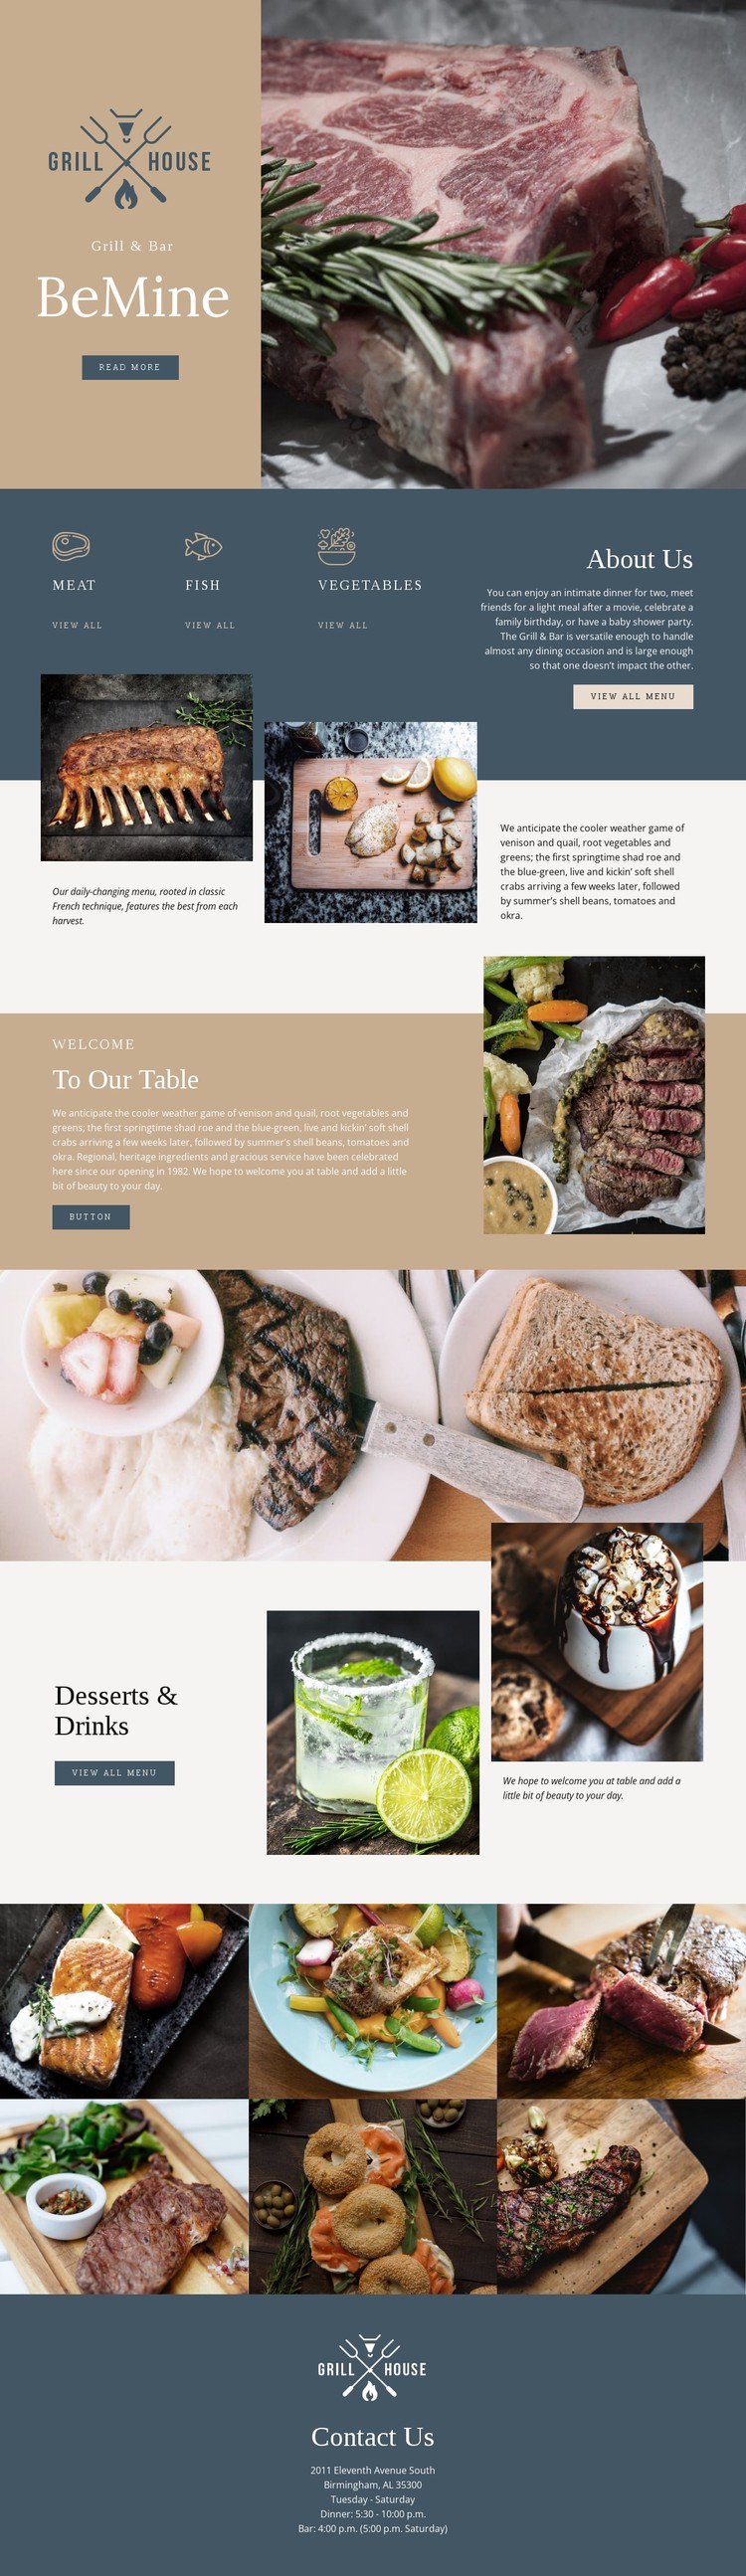 Finest grill house restaurant CSS Template